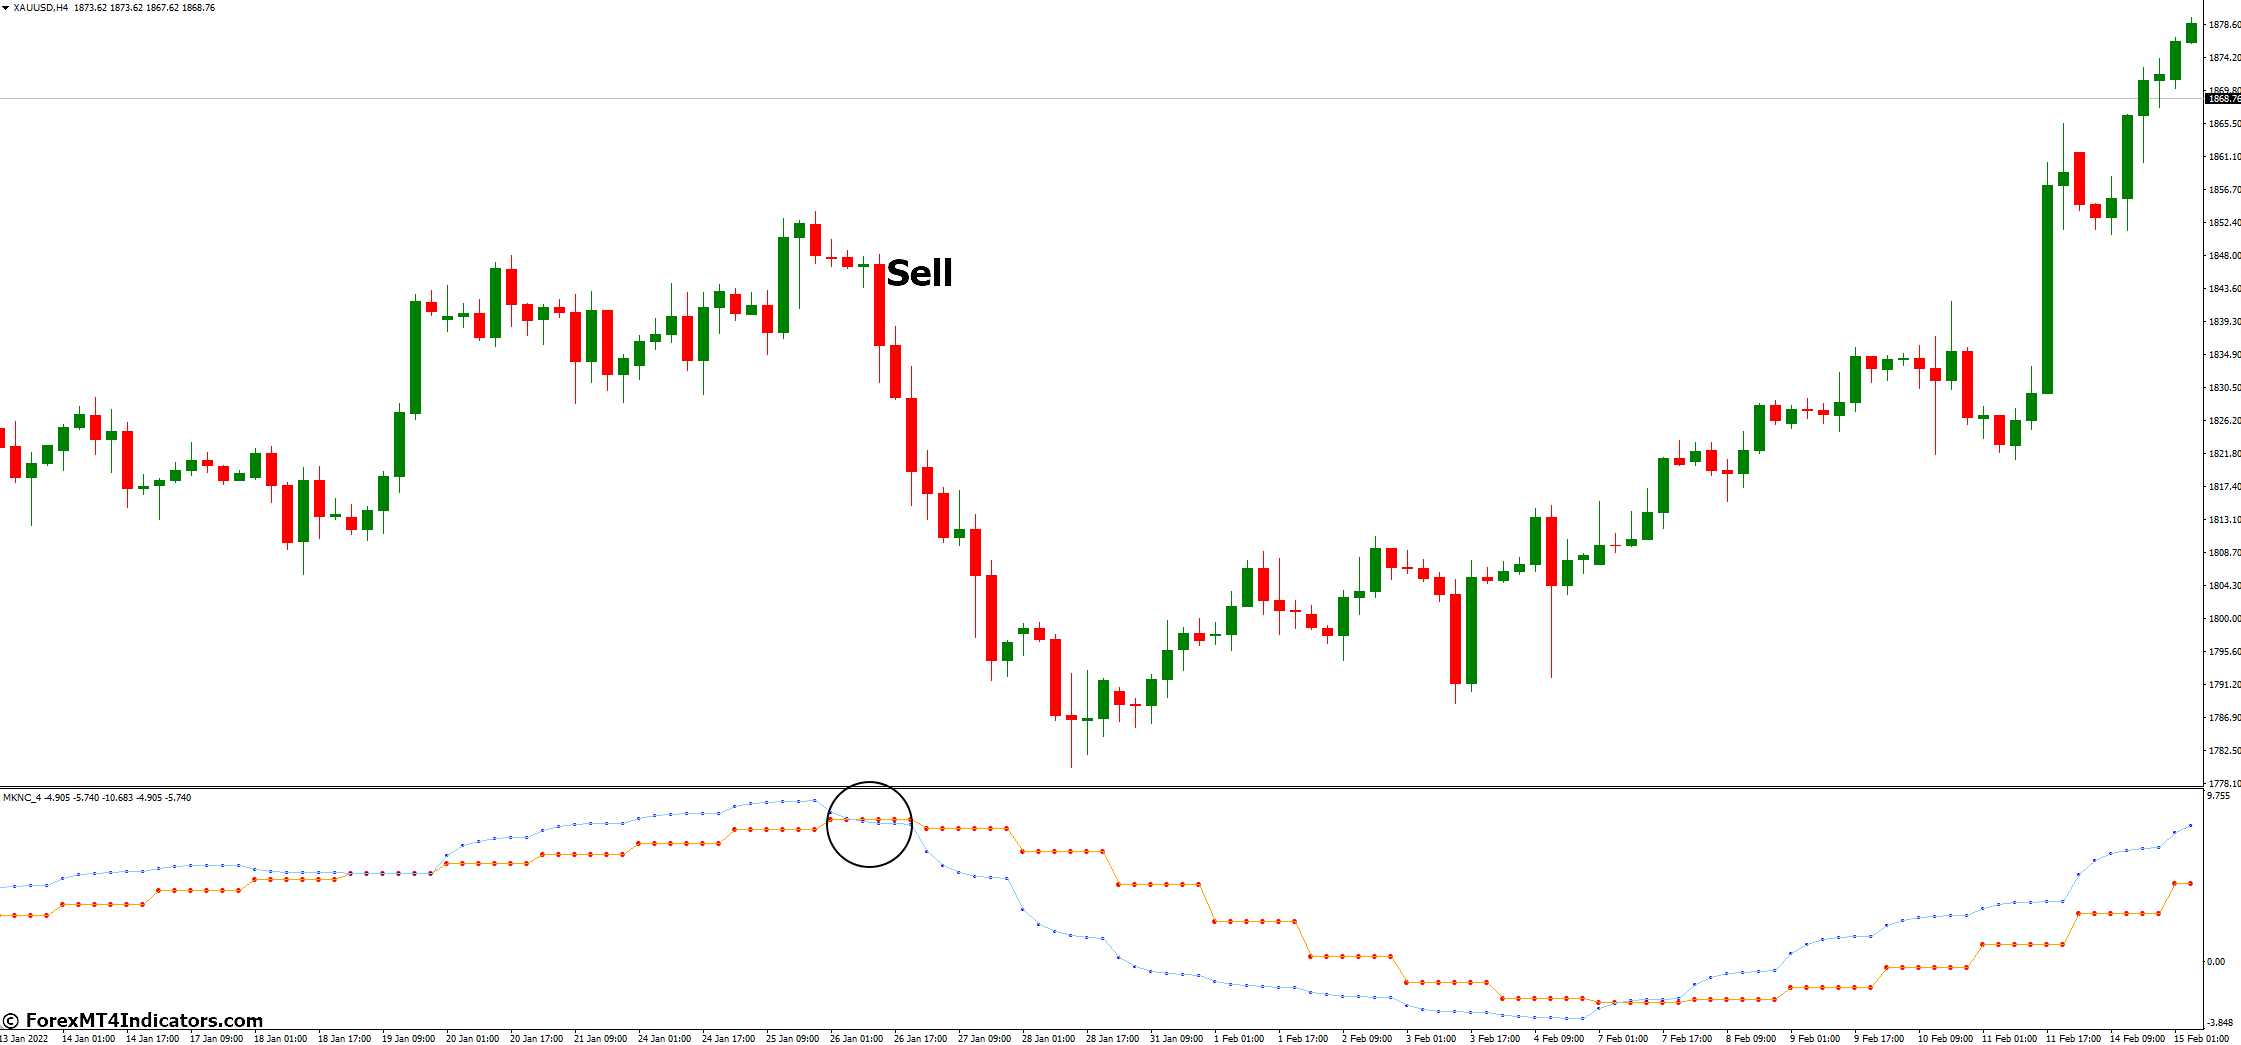 How to Trade with Trend Reversal MT4 Indicator - Sell Entry